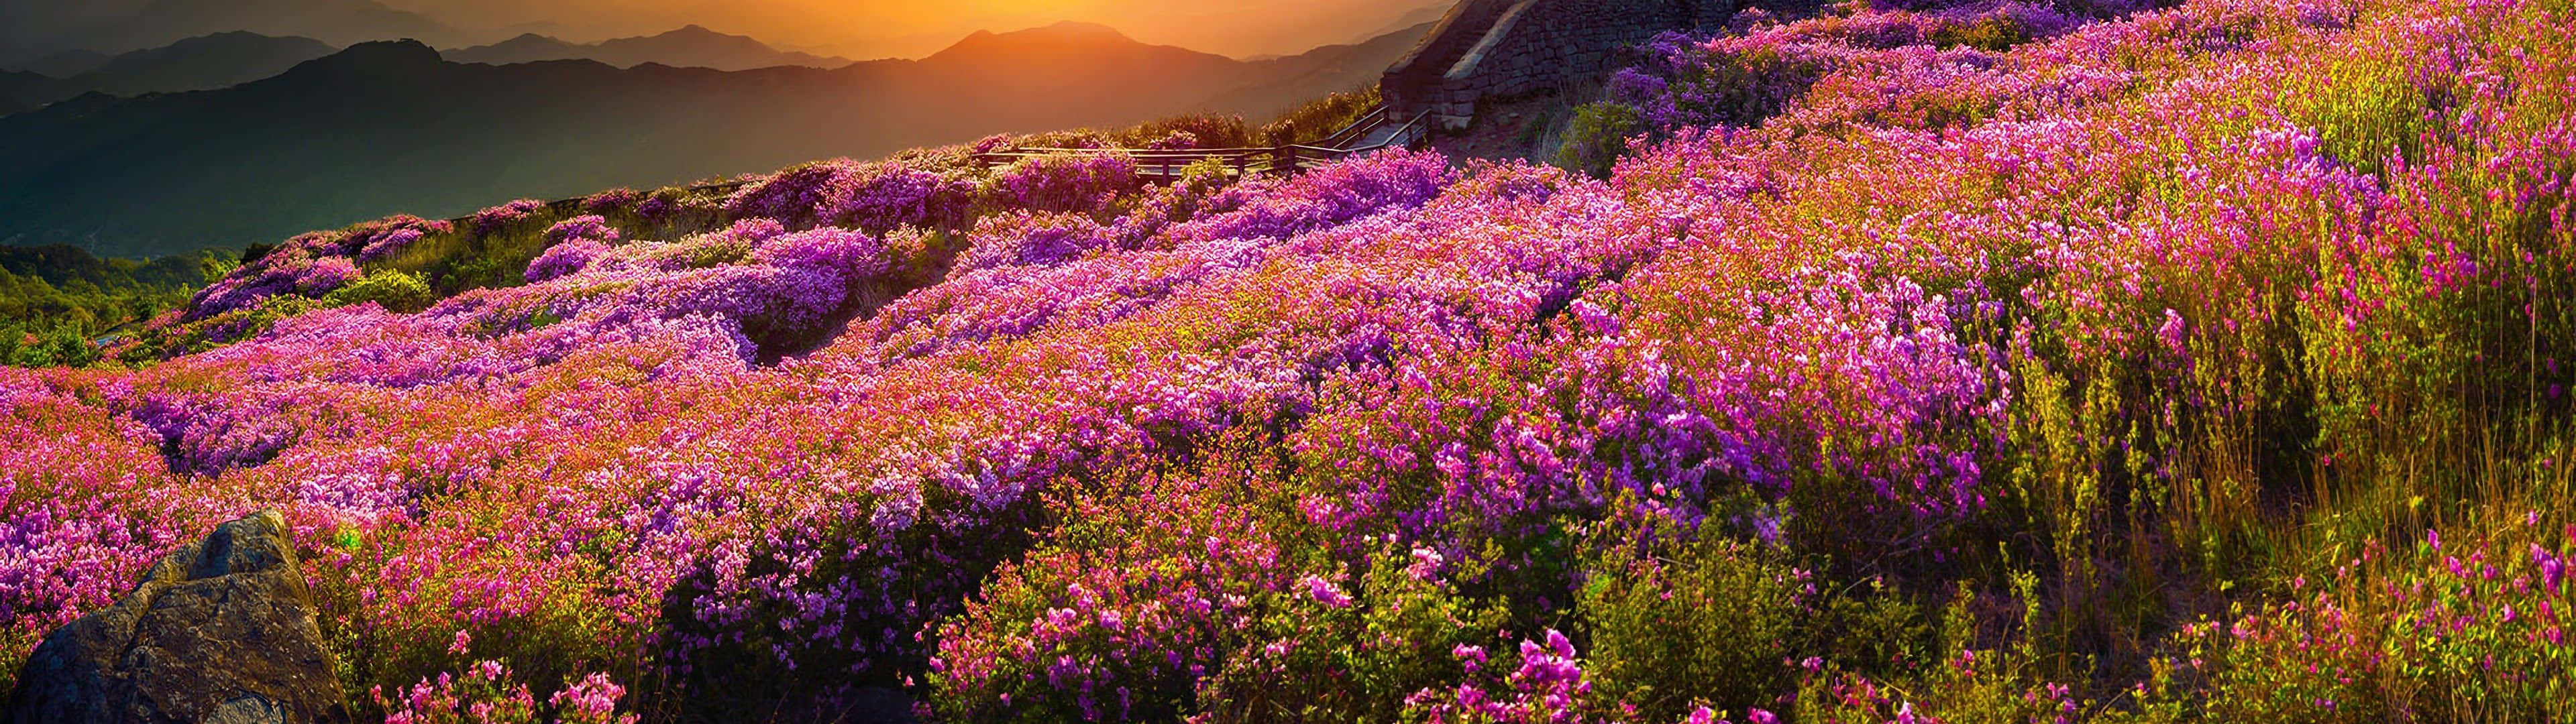 Enjoy the beauty of spring with a dual monitor Wallpaper